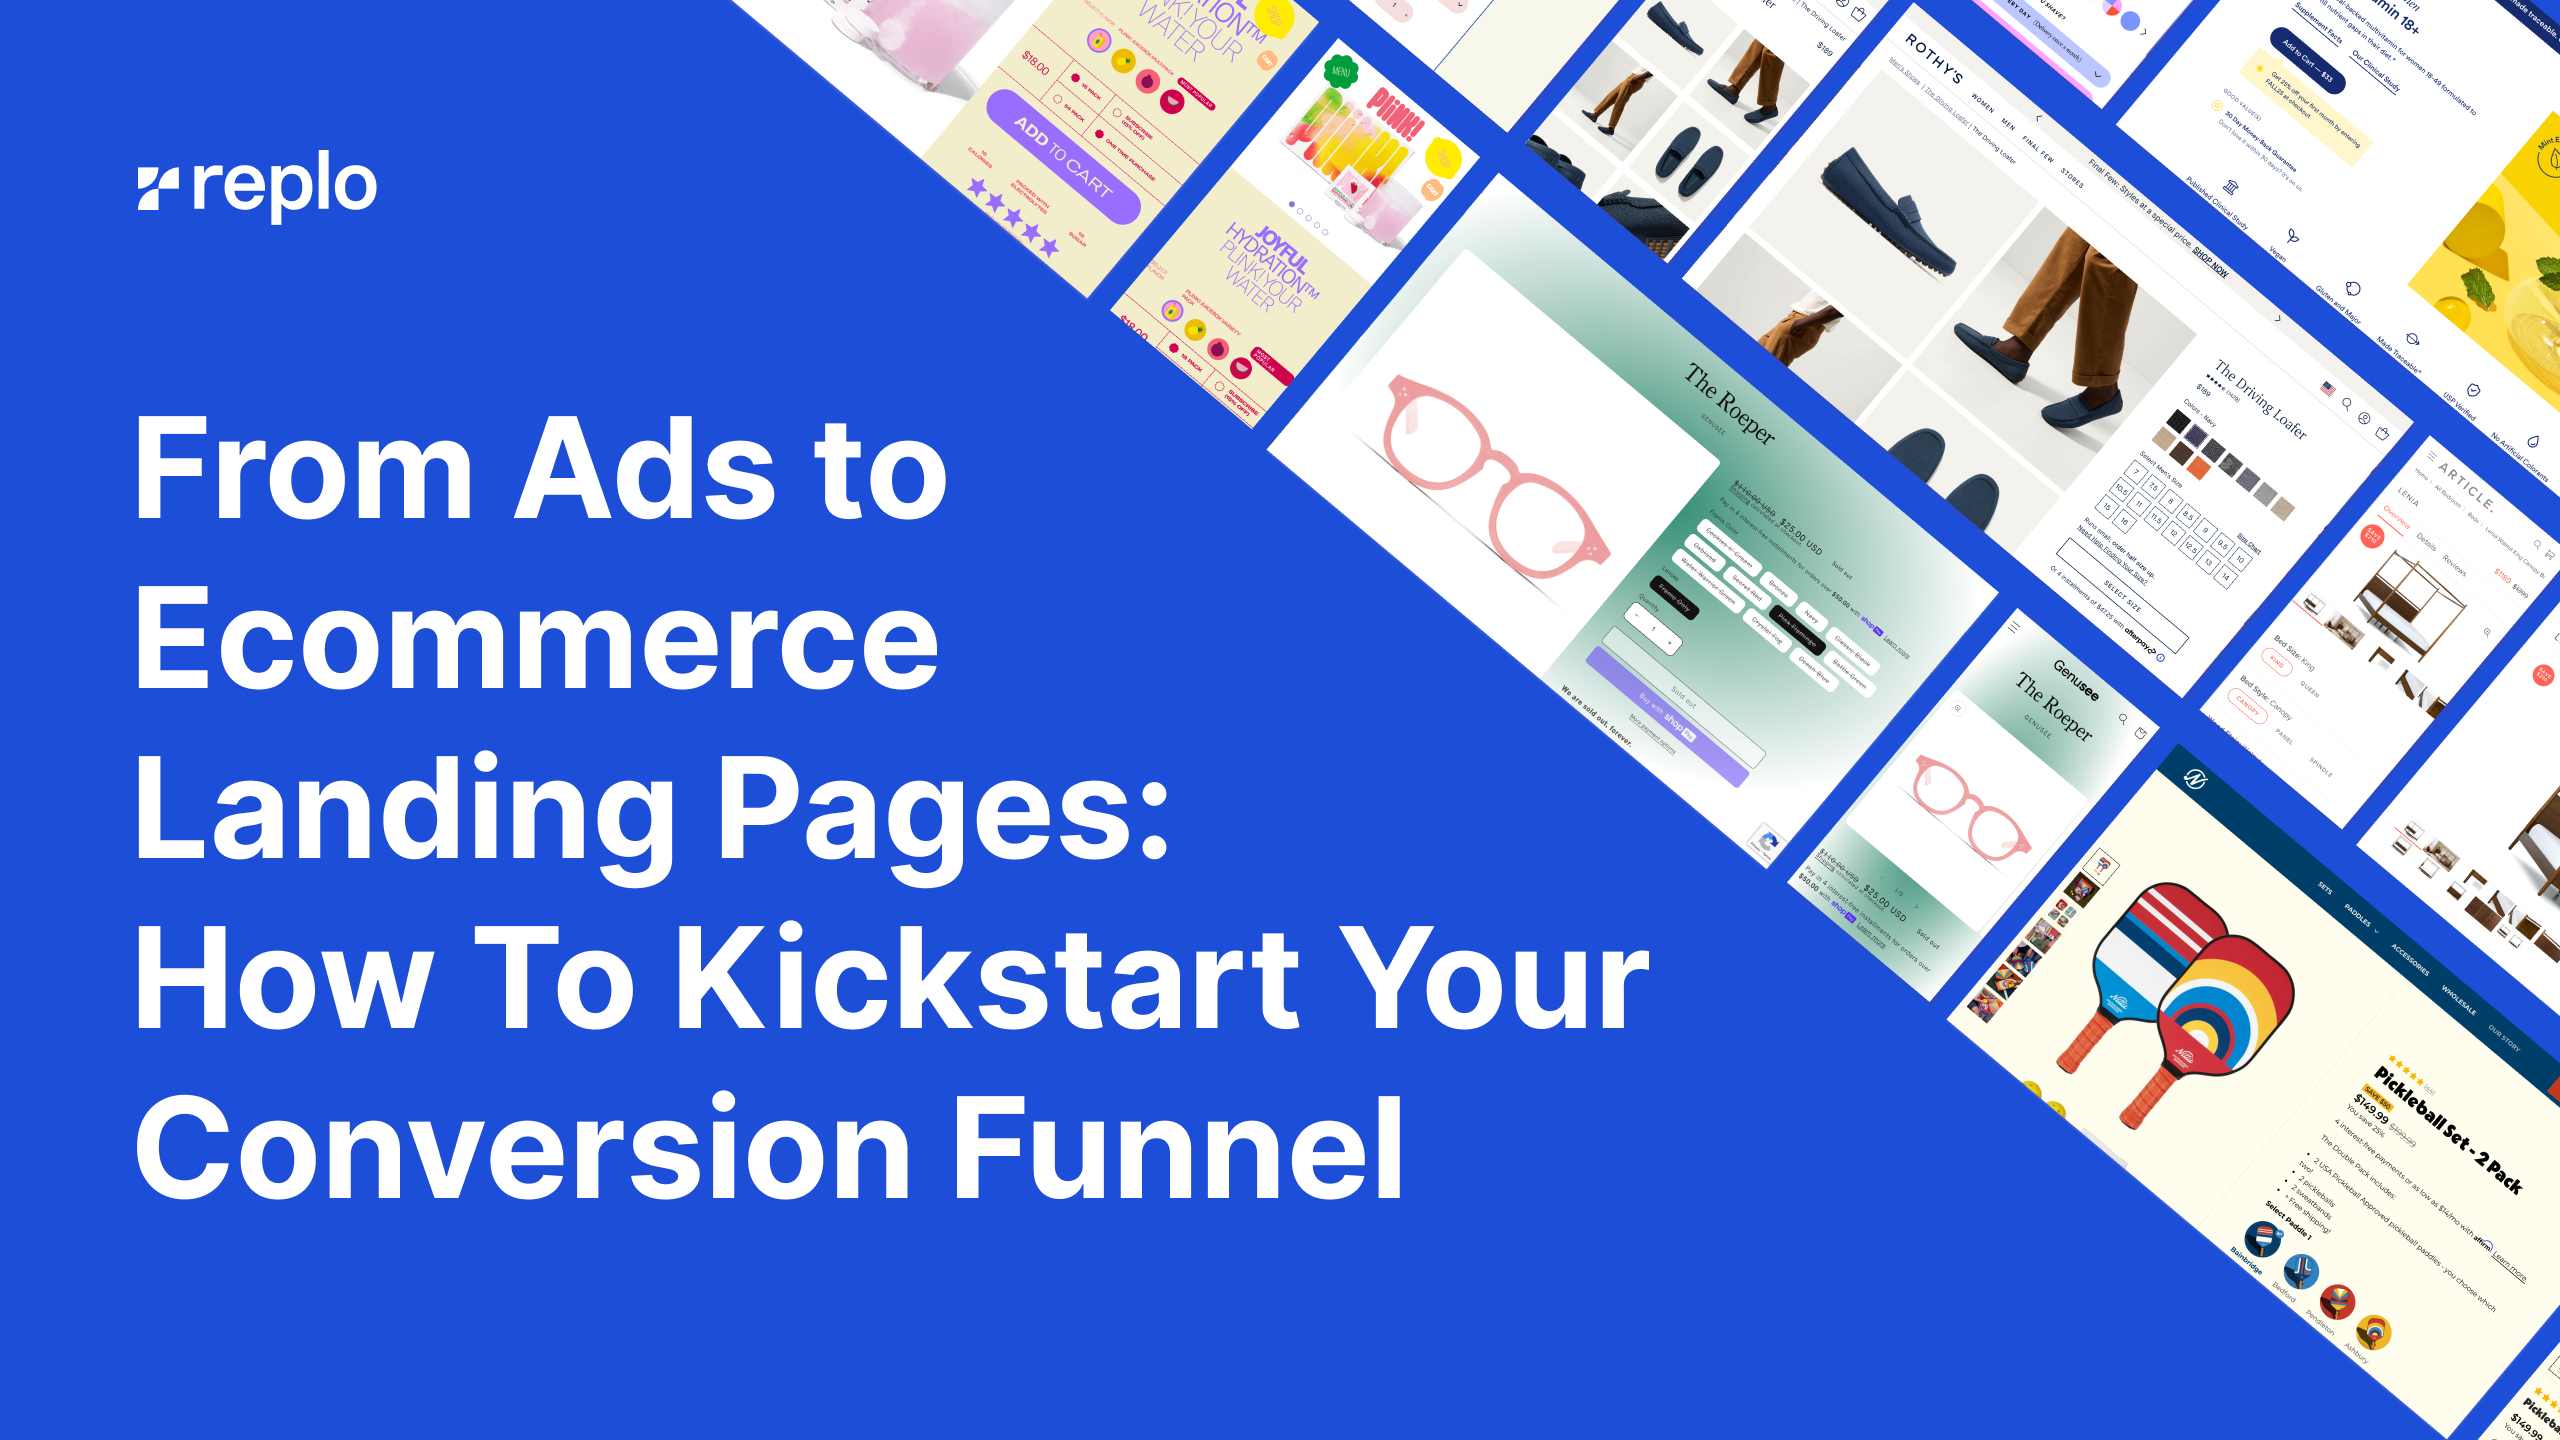 From Ads to Ecommerce Landing Pages: How To Kickstart Your Conversion Funnel